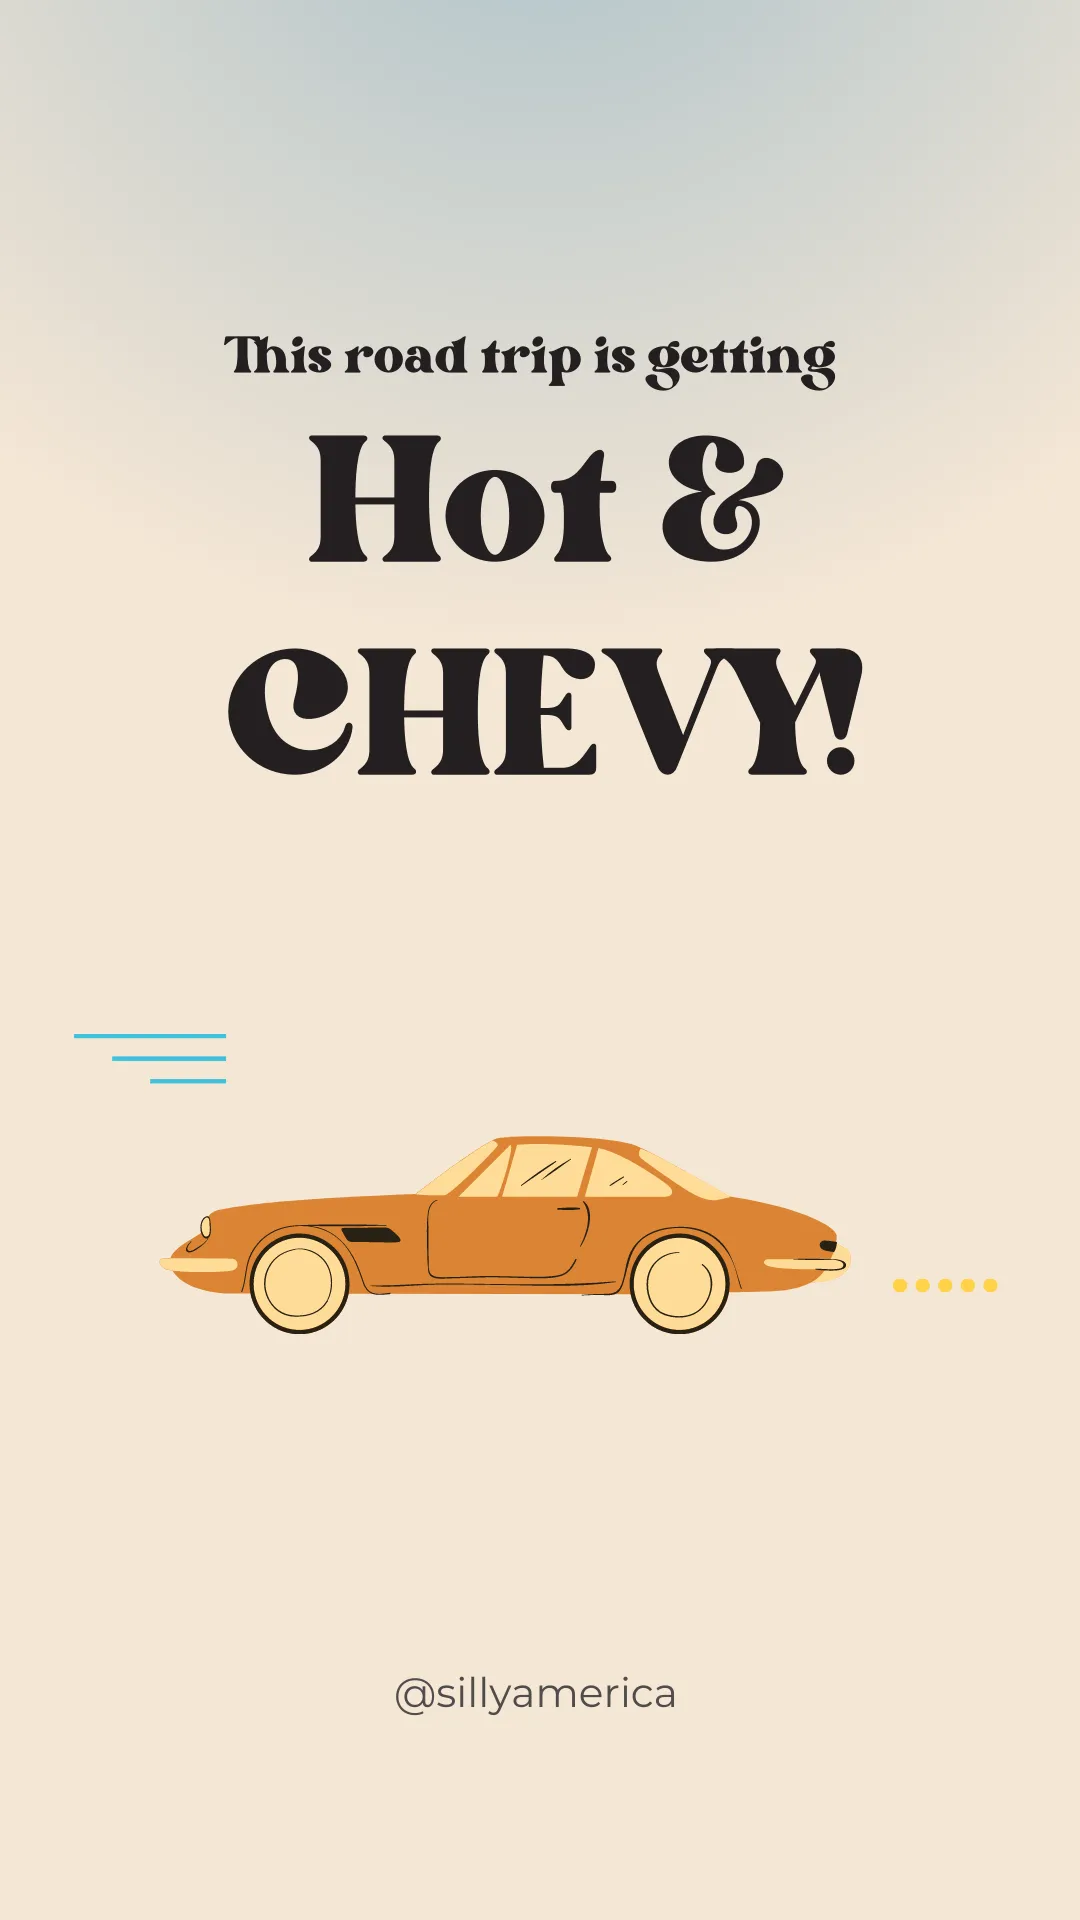 This road trip is getting hot and CHEVY! - Road Trip Puns